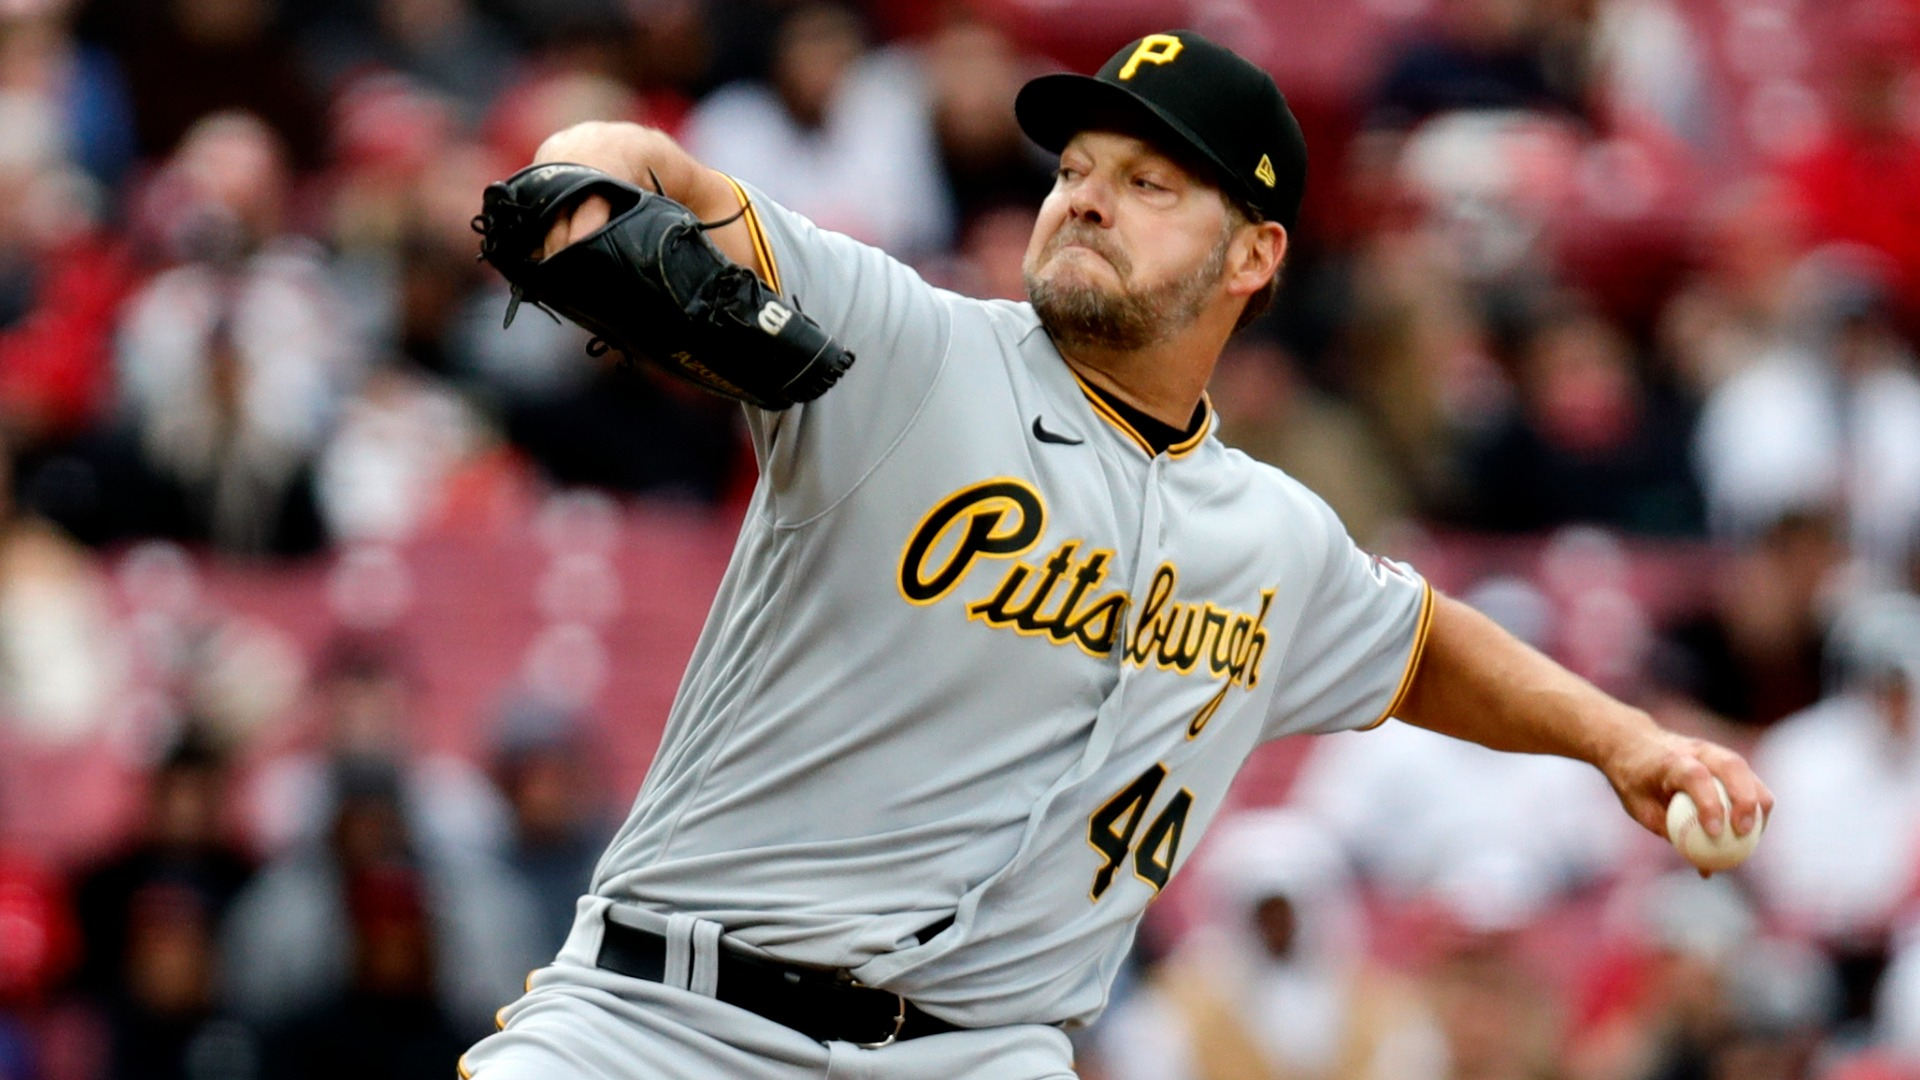 Pirates swept by Cubs, trail by 15 games in NL Central